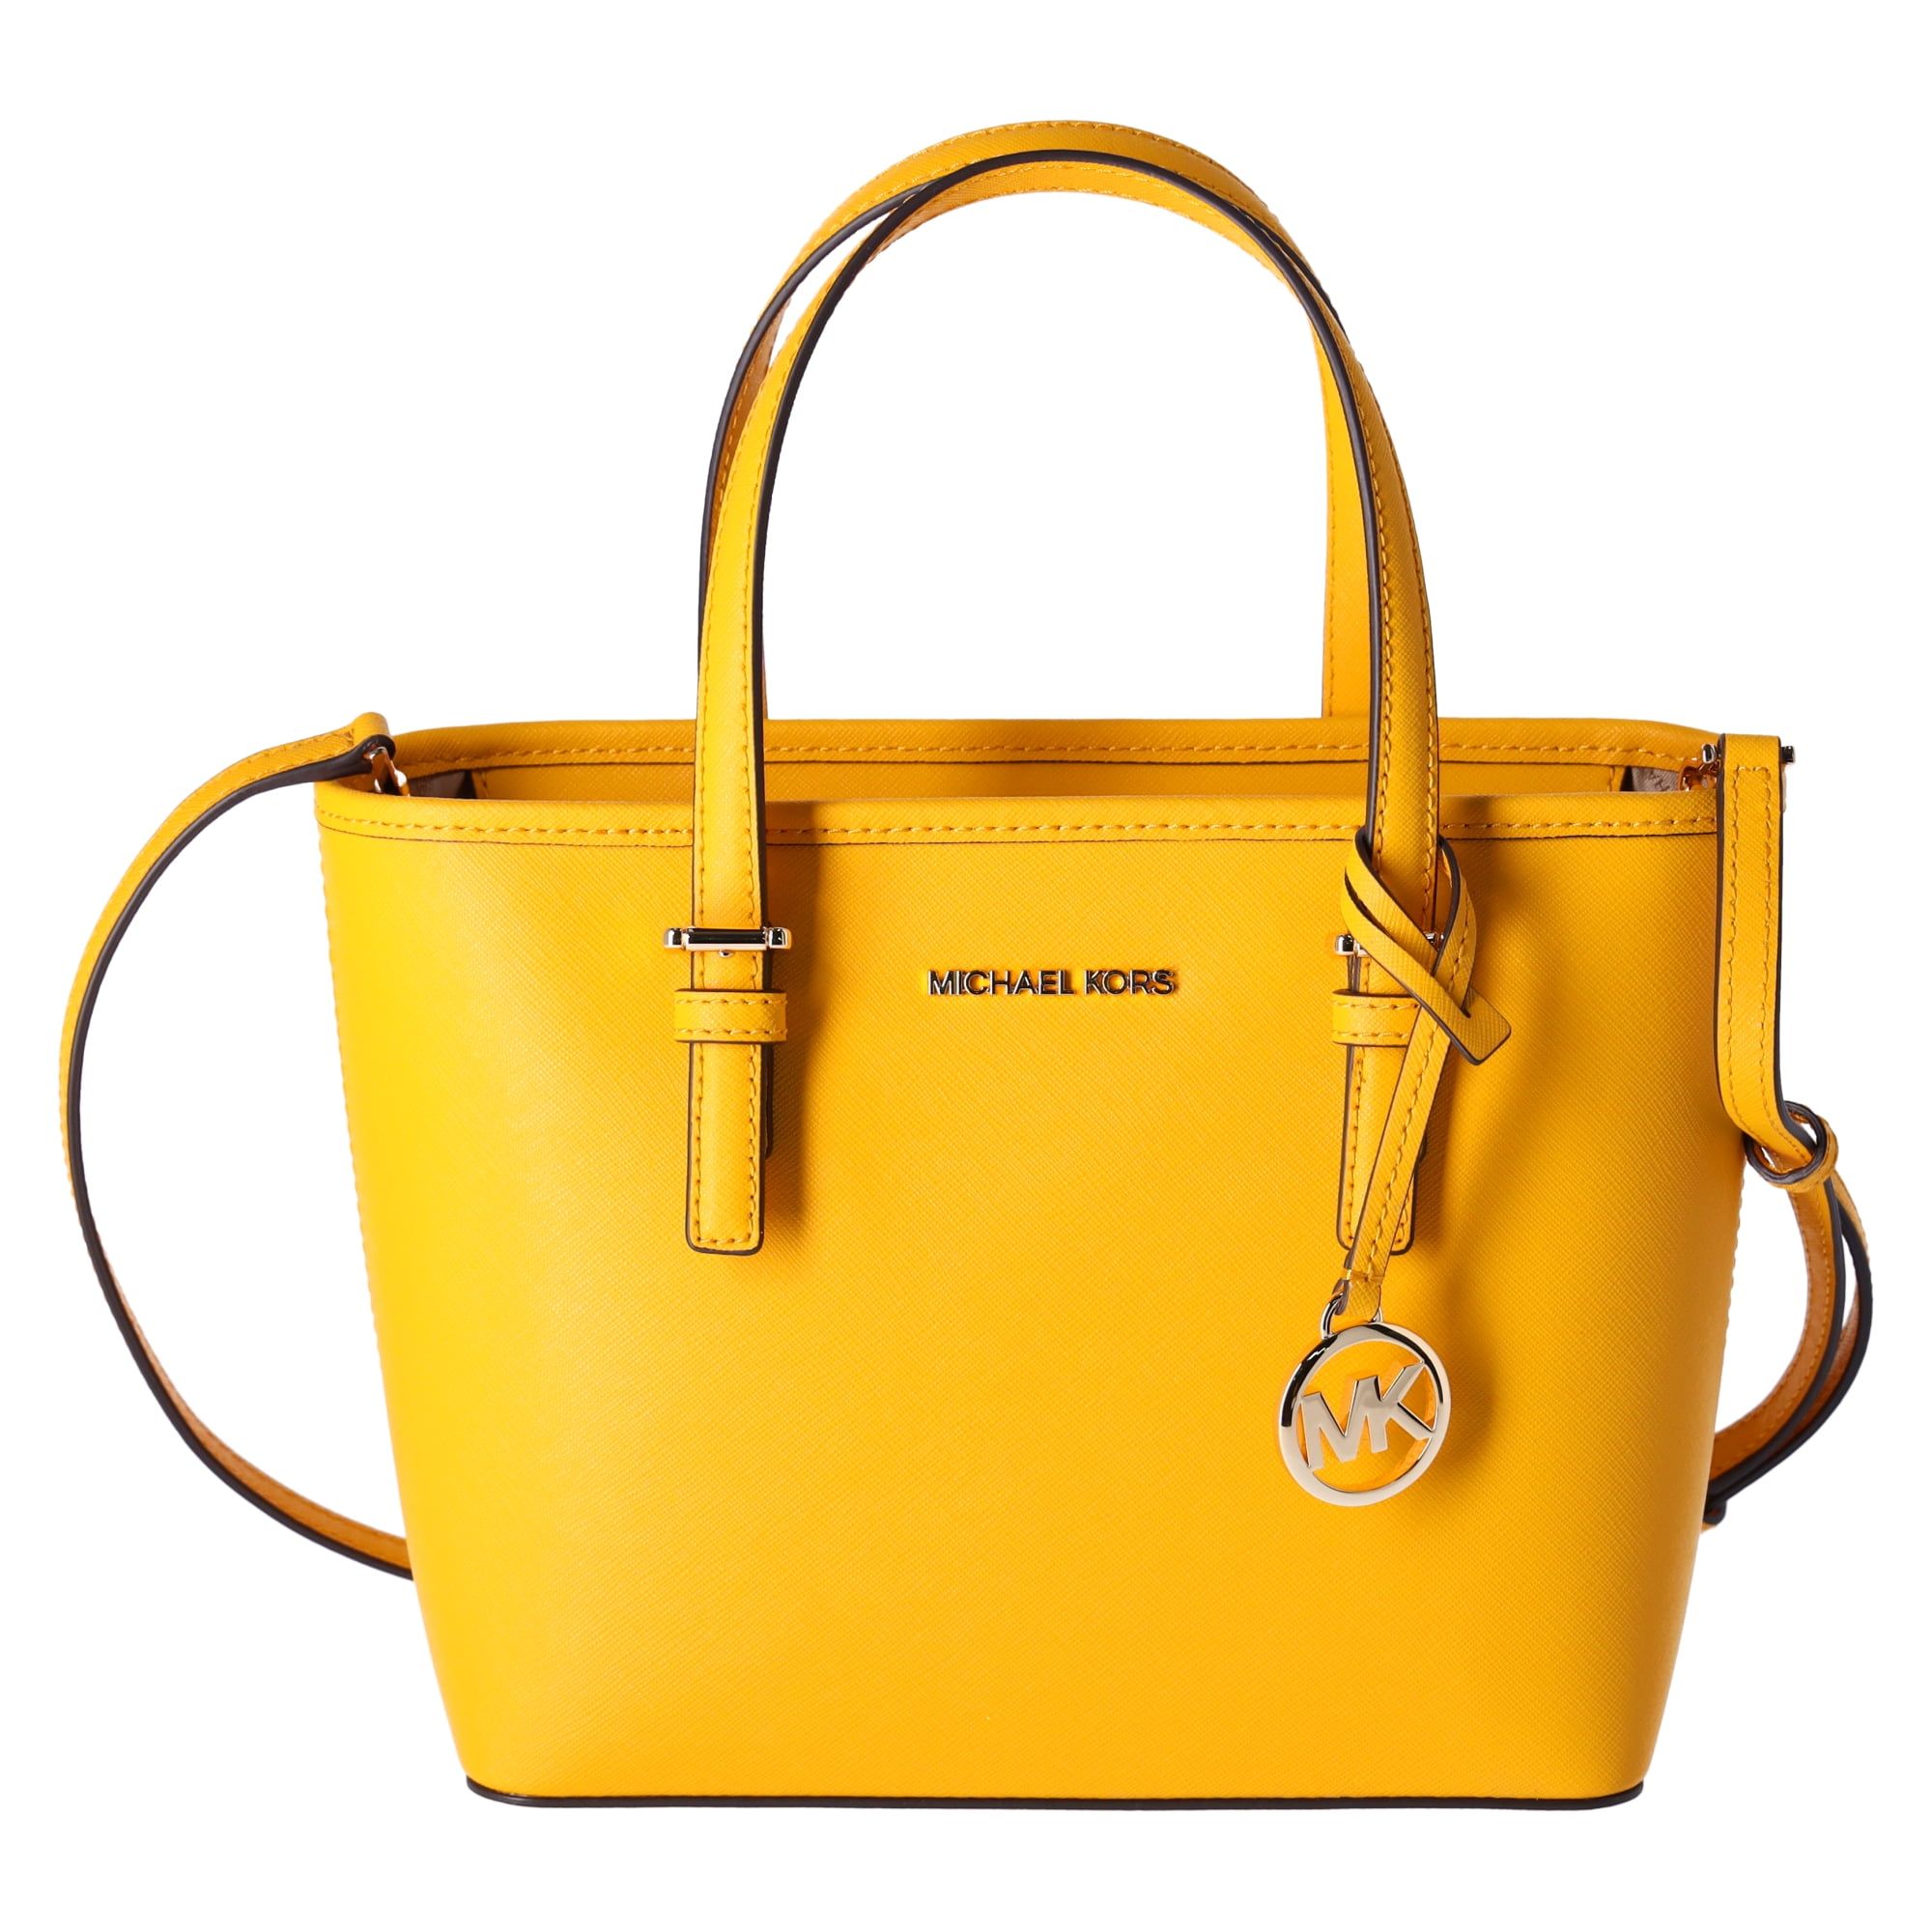 Michael Kors Purse Crossbody Bag Yellow Size One Size - $139 New With Tags  - From Maiah